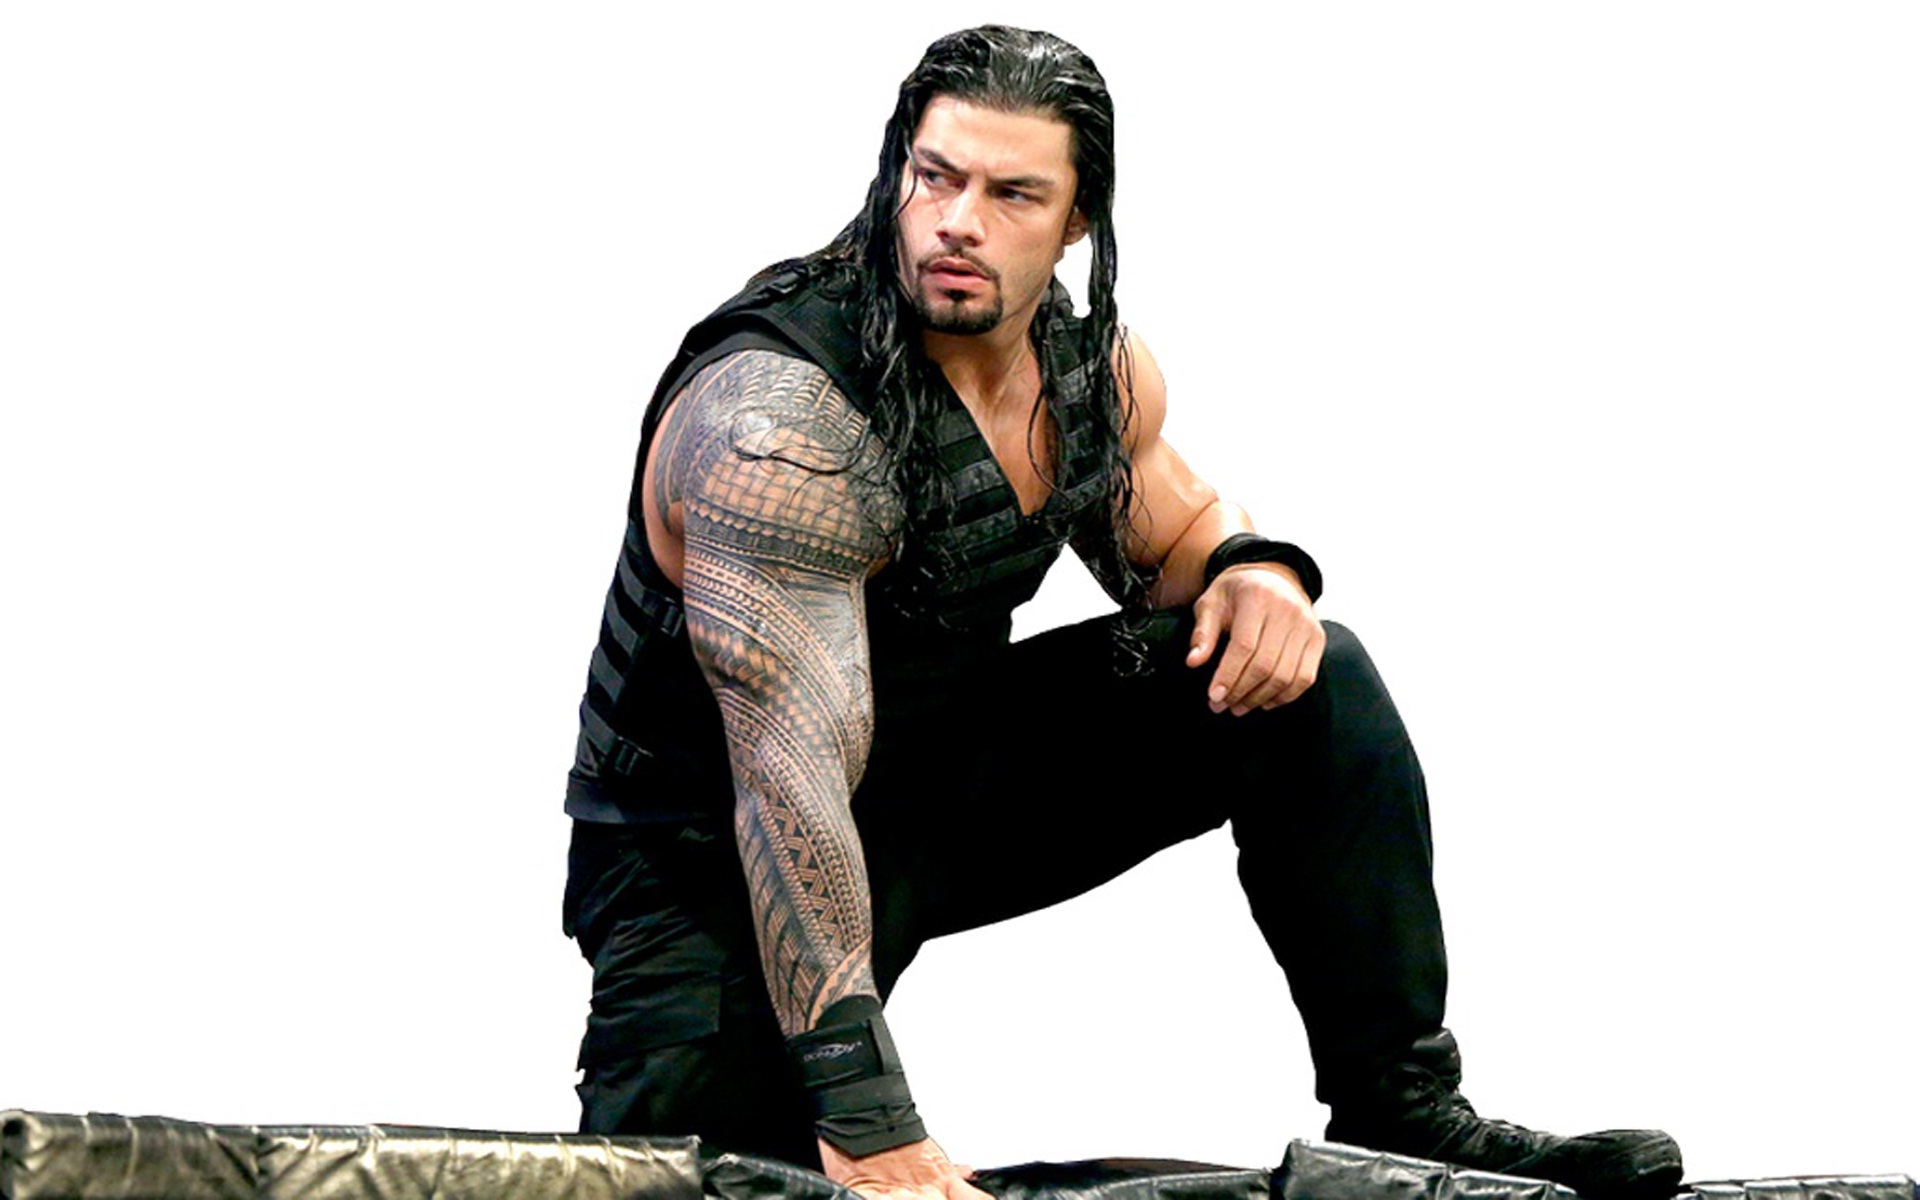 100+] Roman Reigns Wallpapers | Wallpapers.com